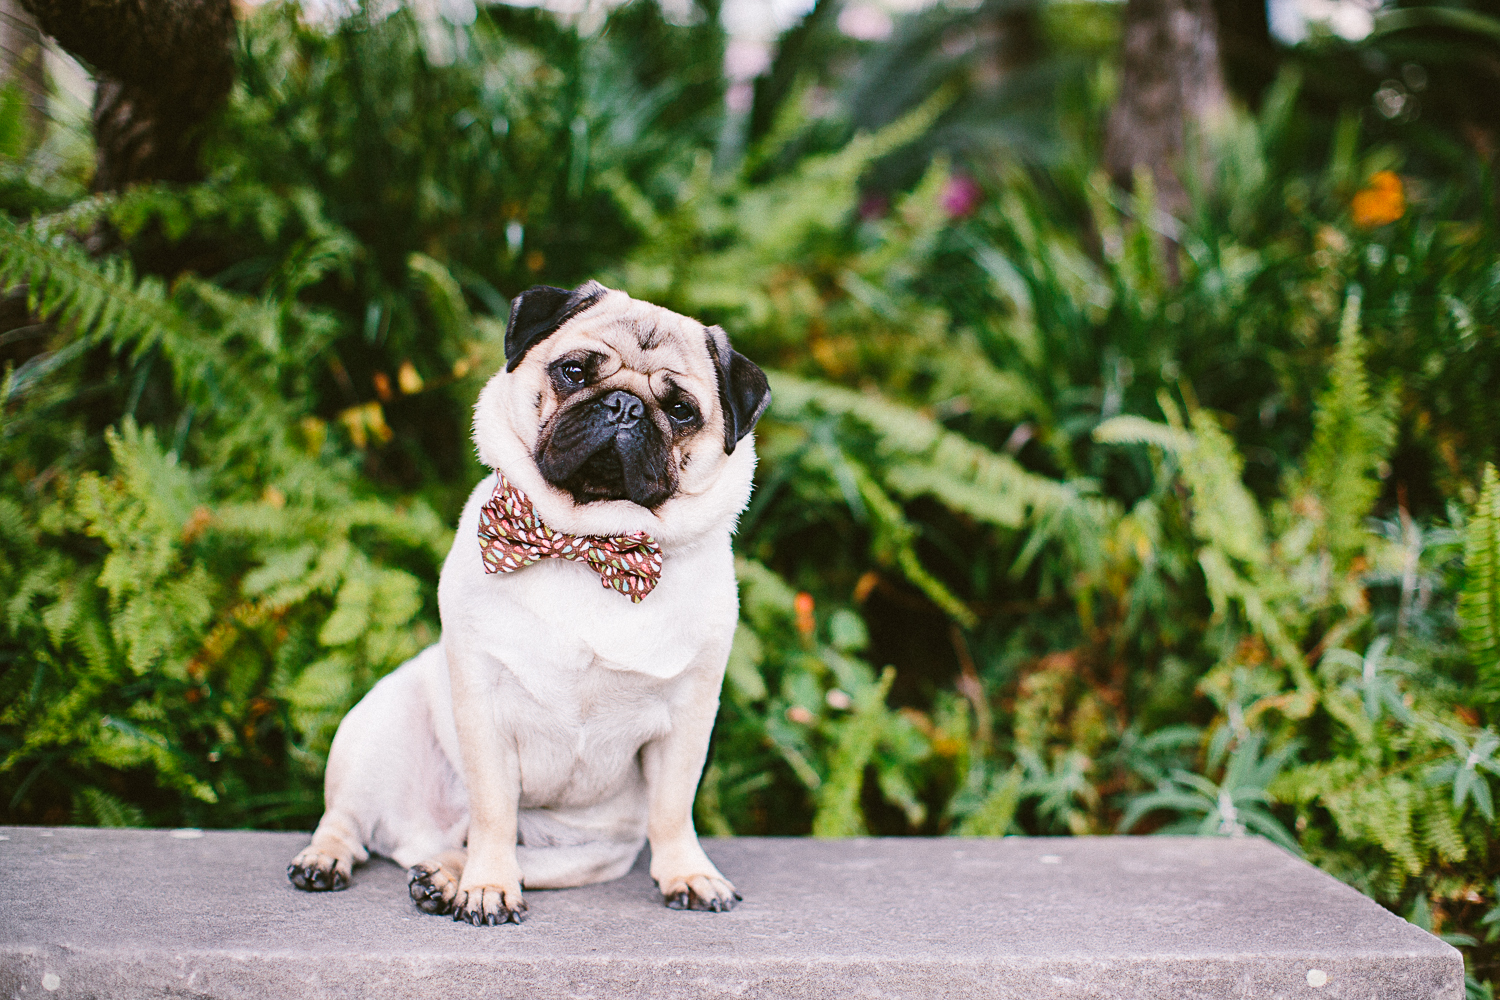 twoguineapigs_pet_photography_oh_jaffa_picnic_pugs_1500-18.jpg